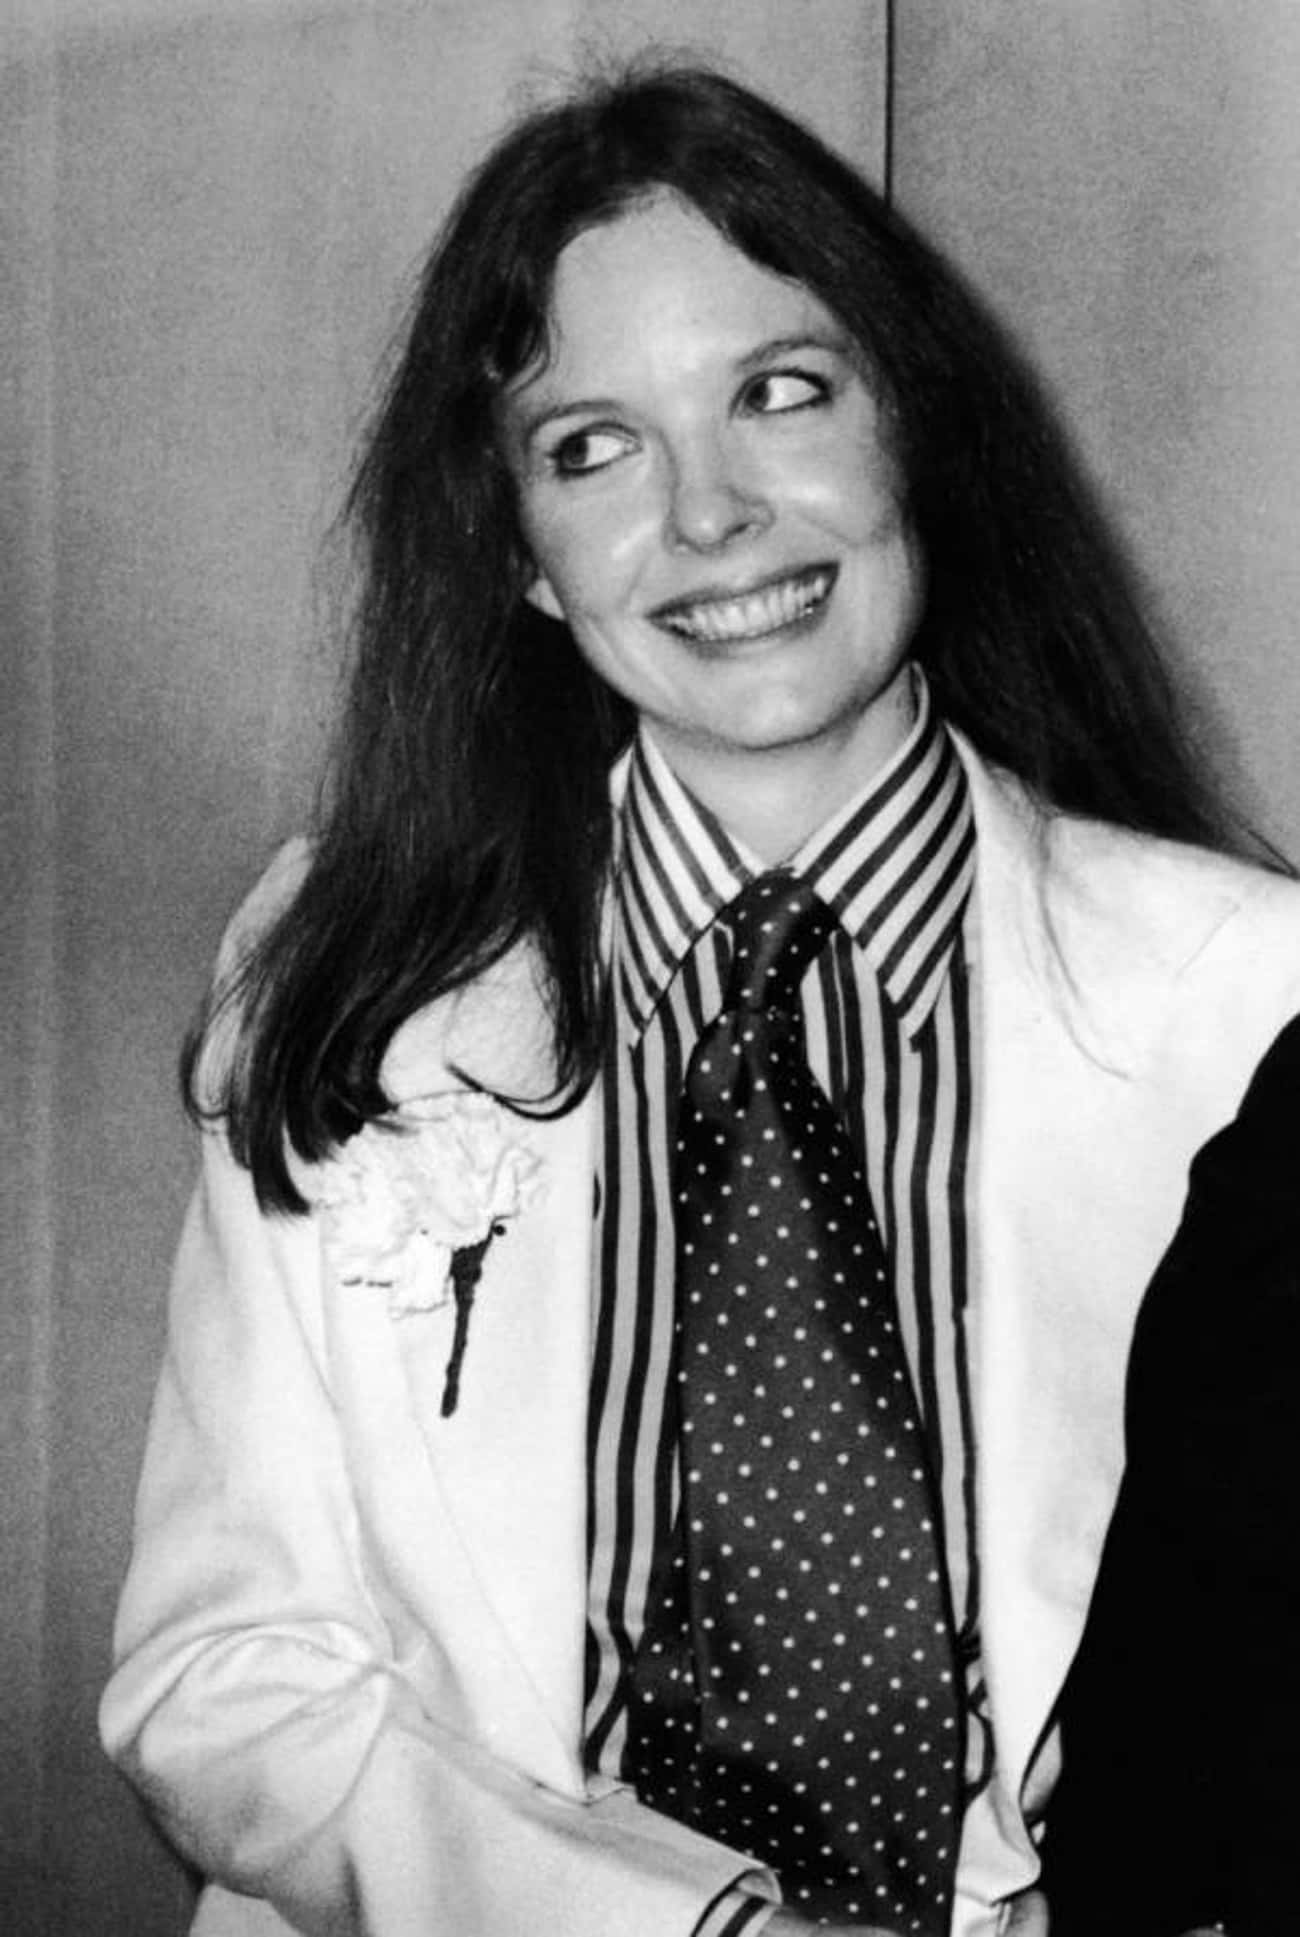 Young Diane Keaton in a White Coat and Striped Buttondown